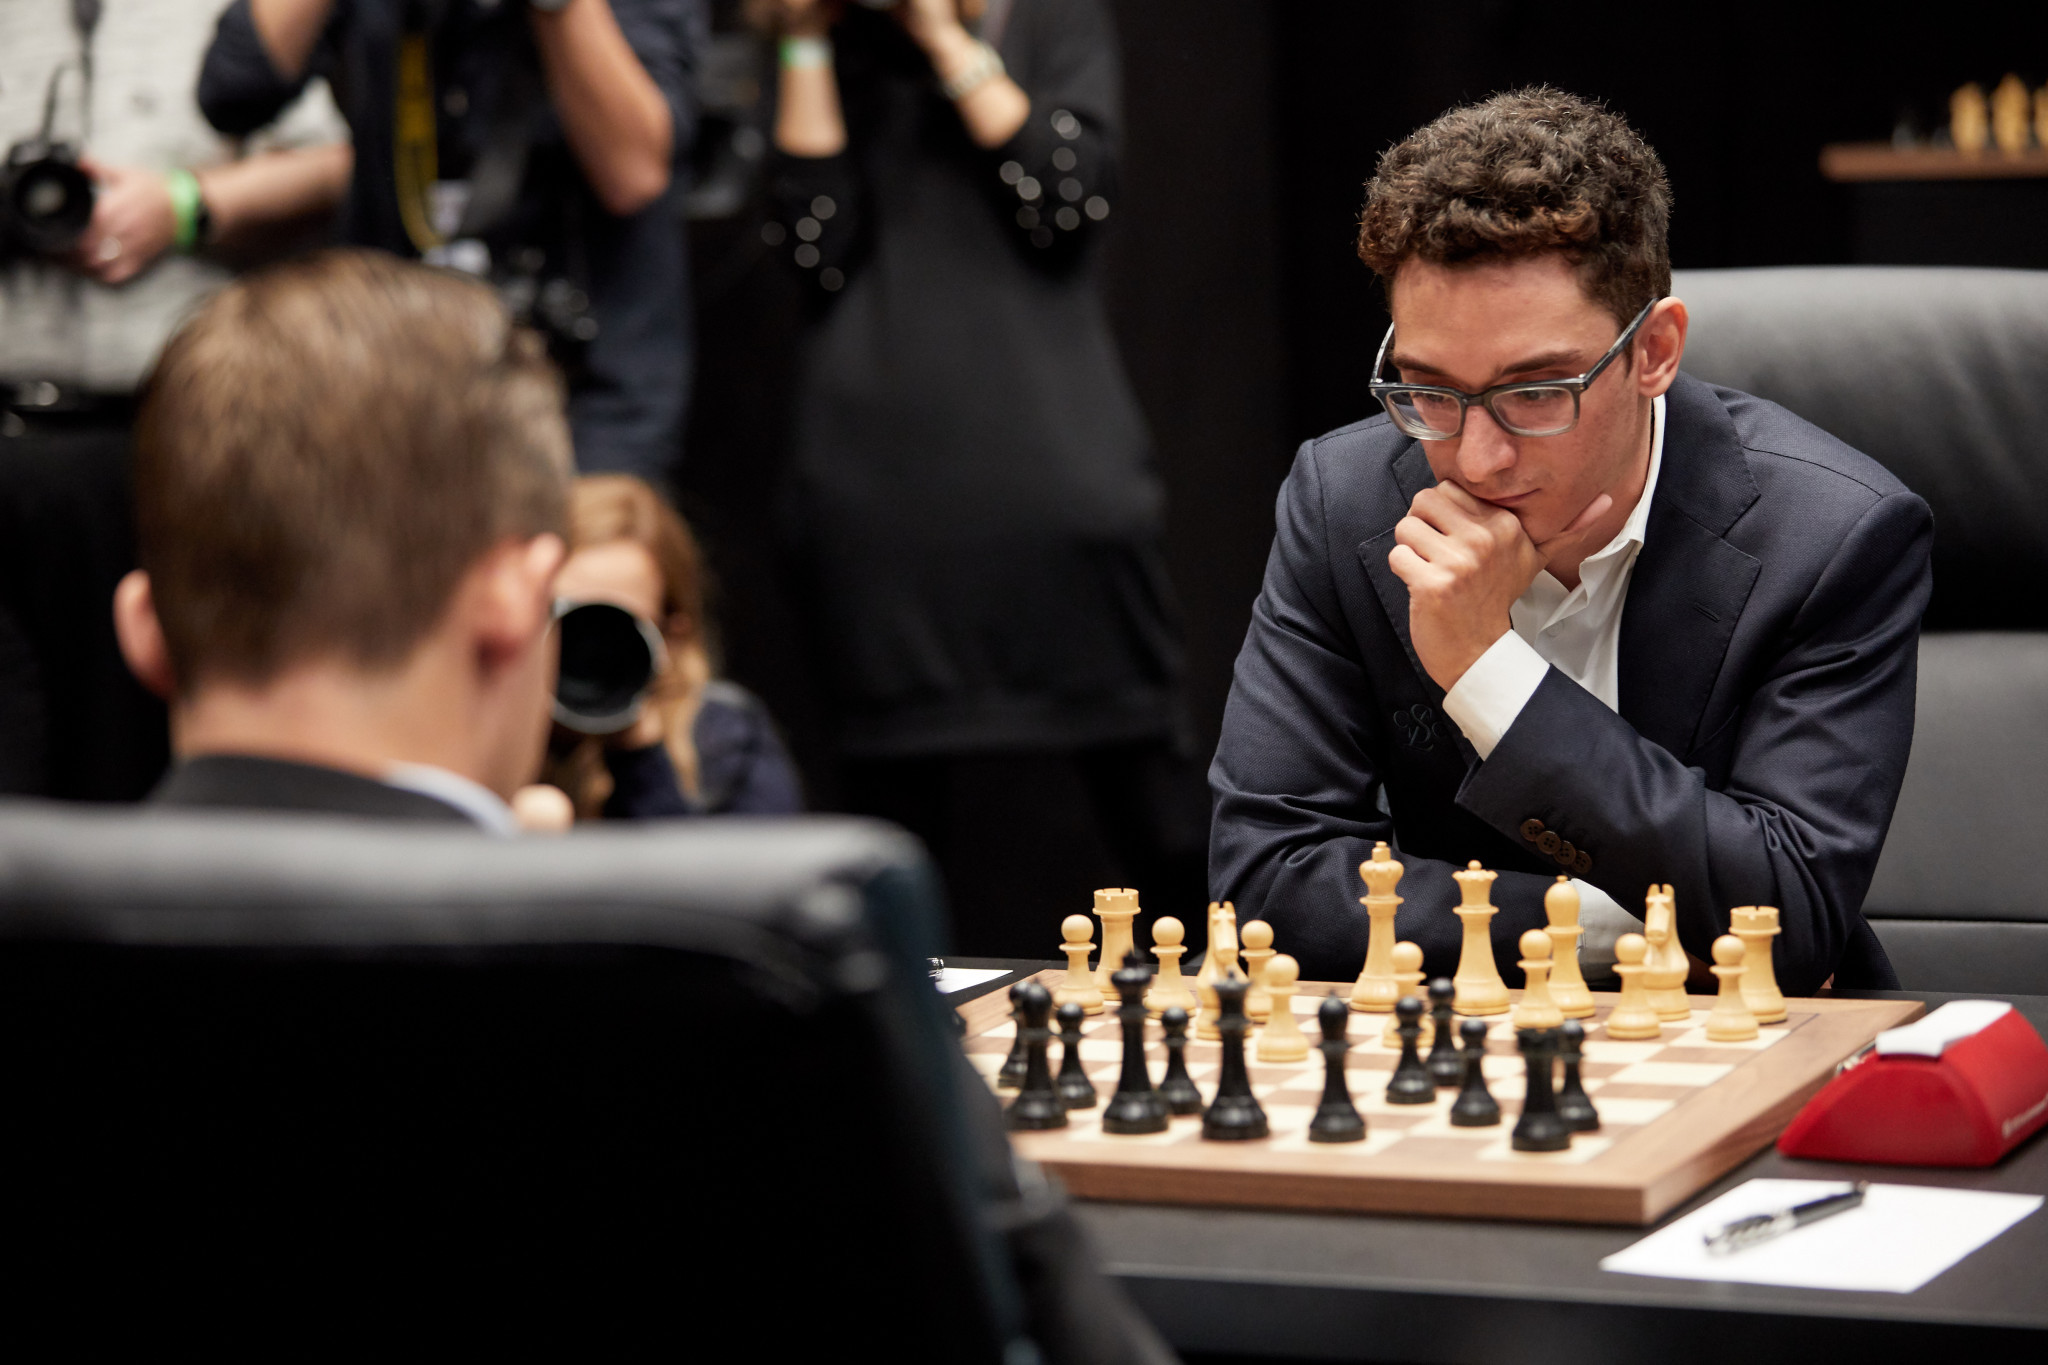 Caruana improves as second match another draw at World Chess Championship